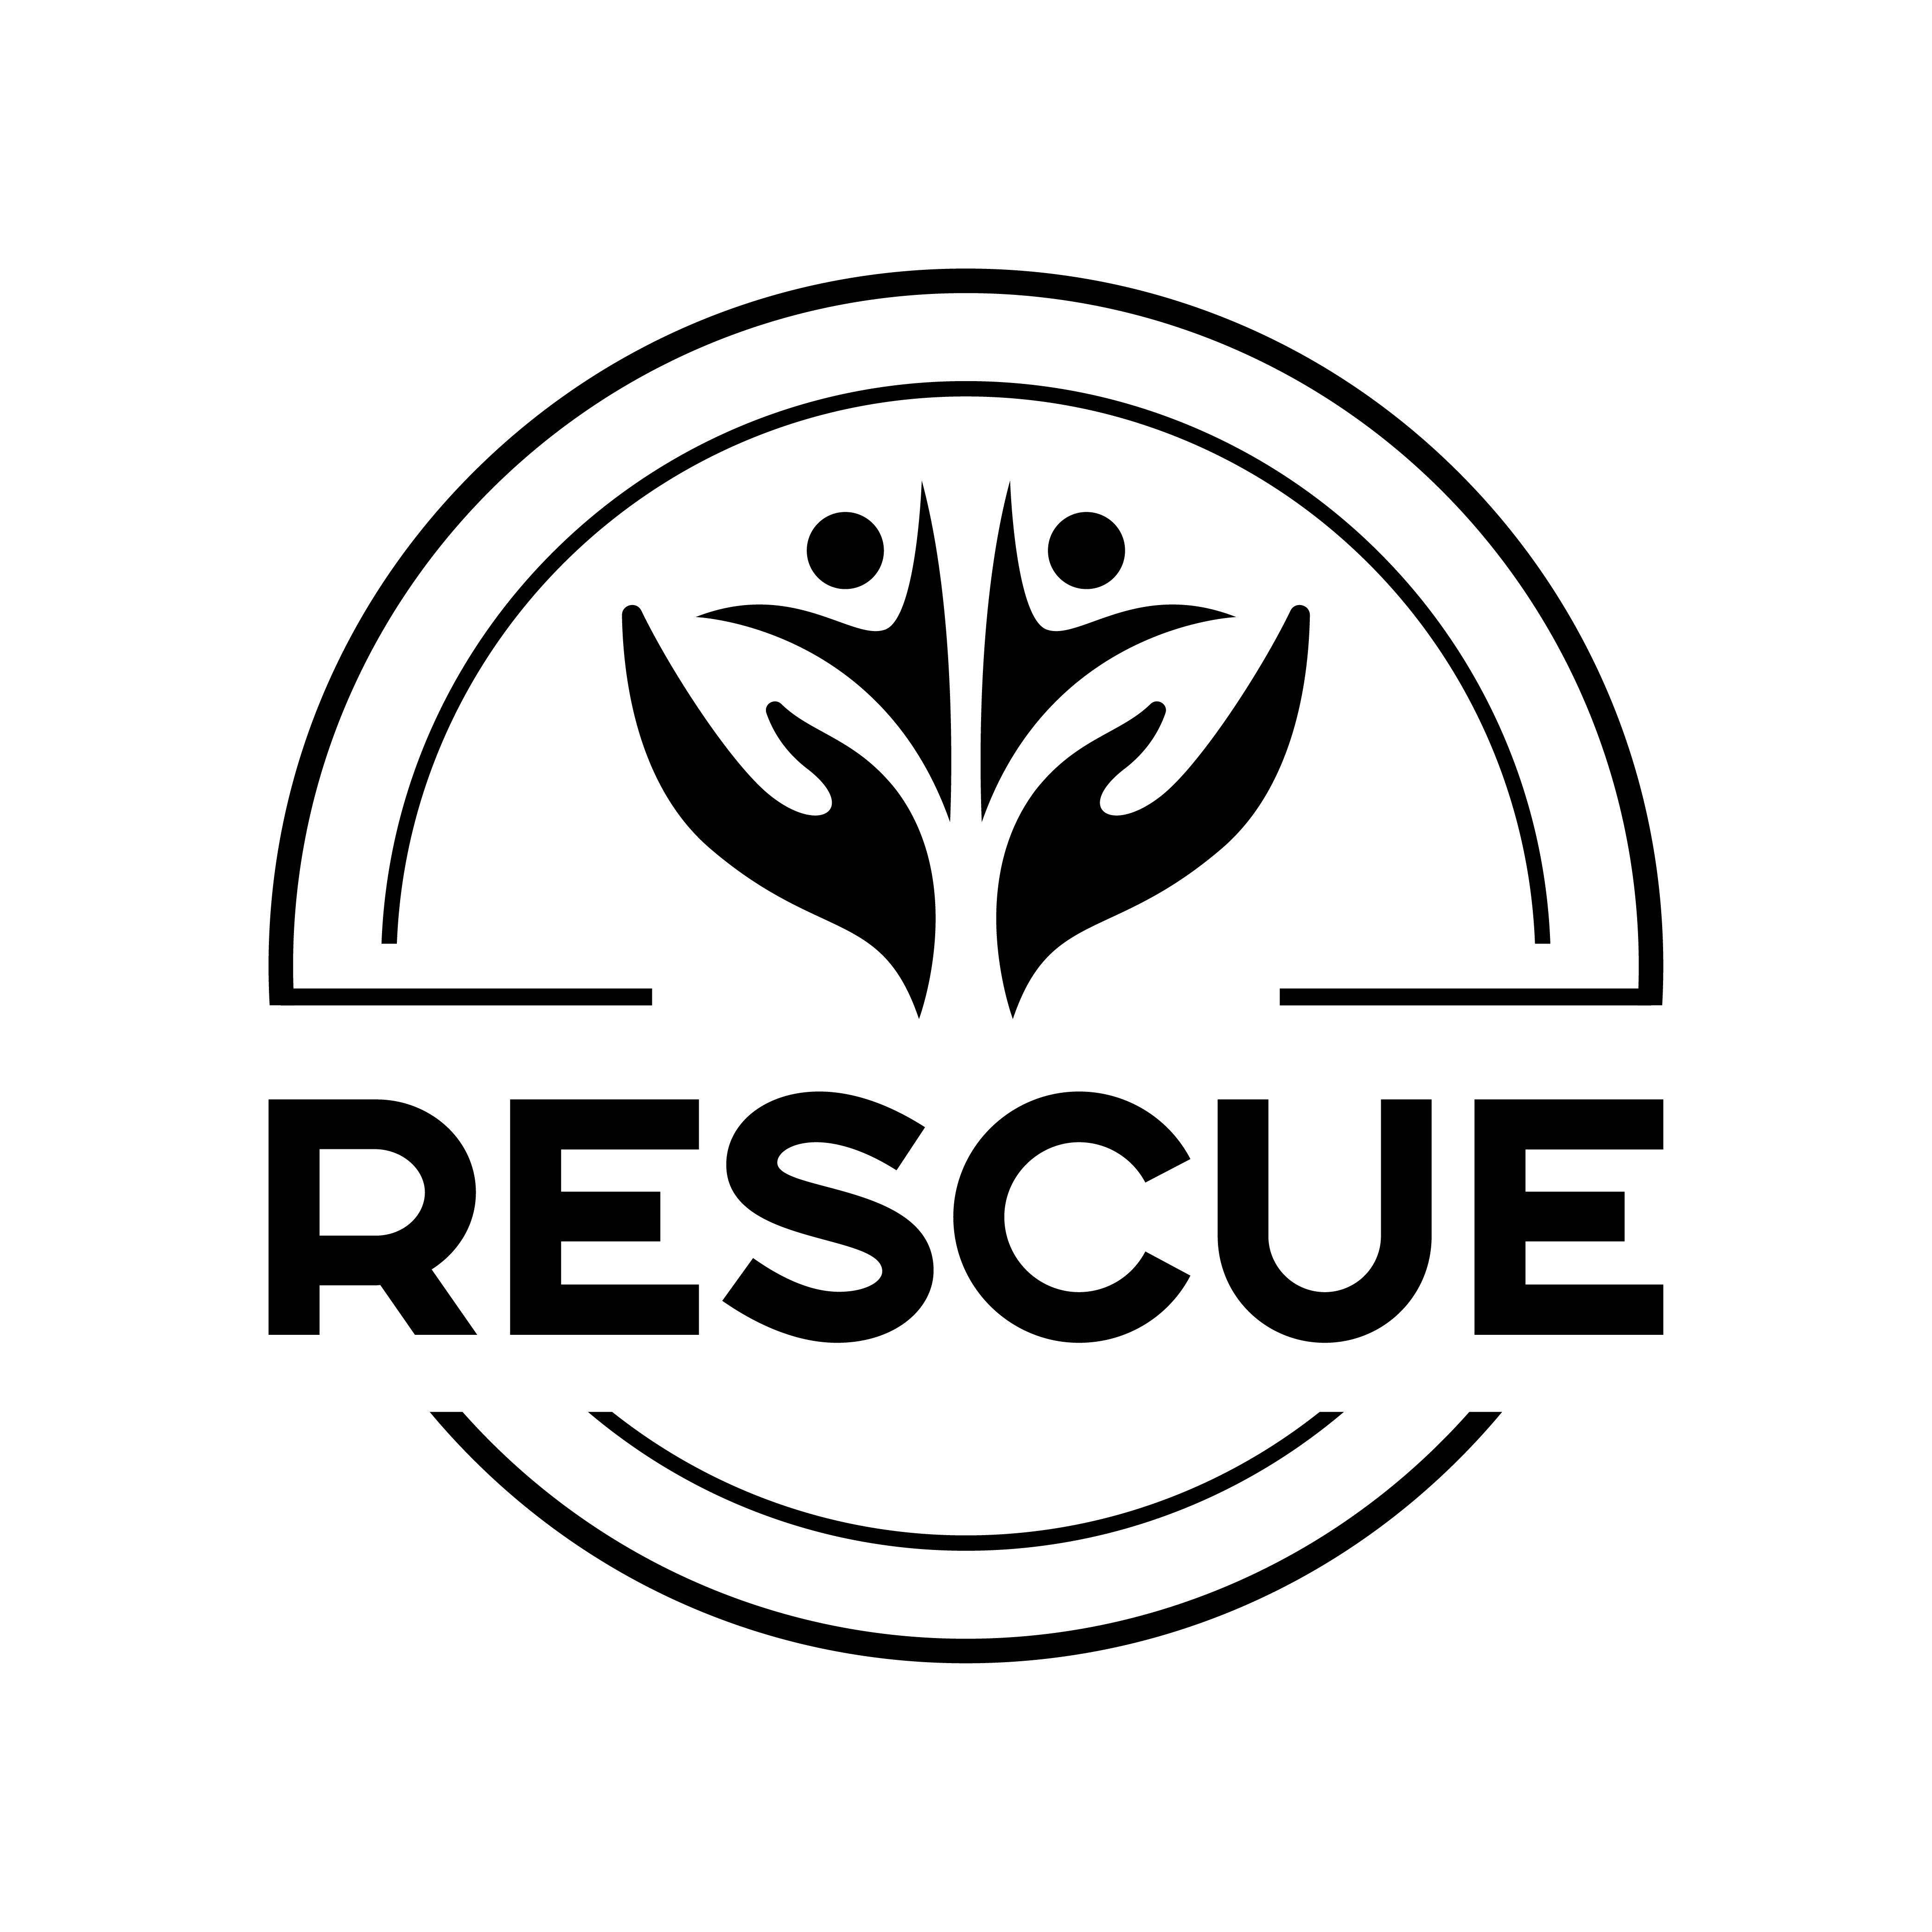 Rescue Each One